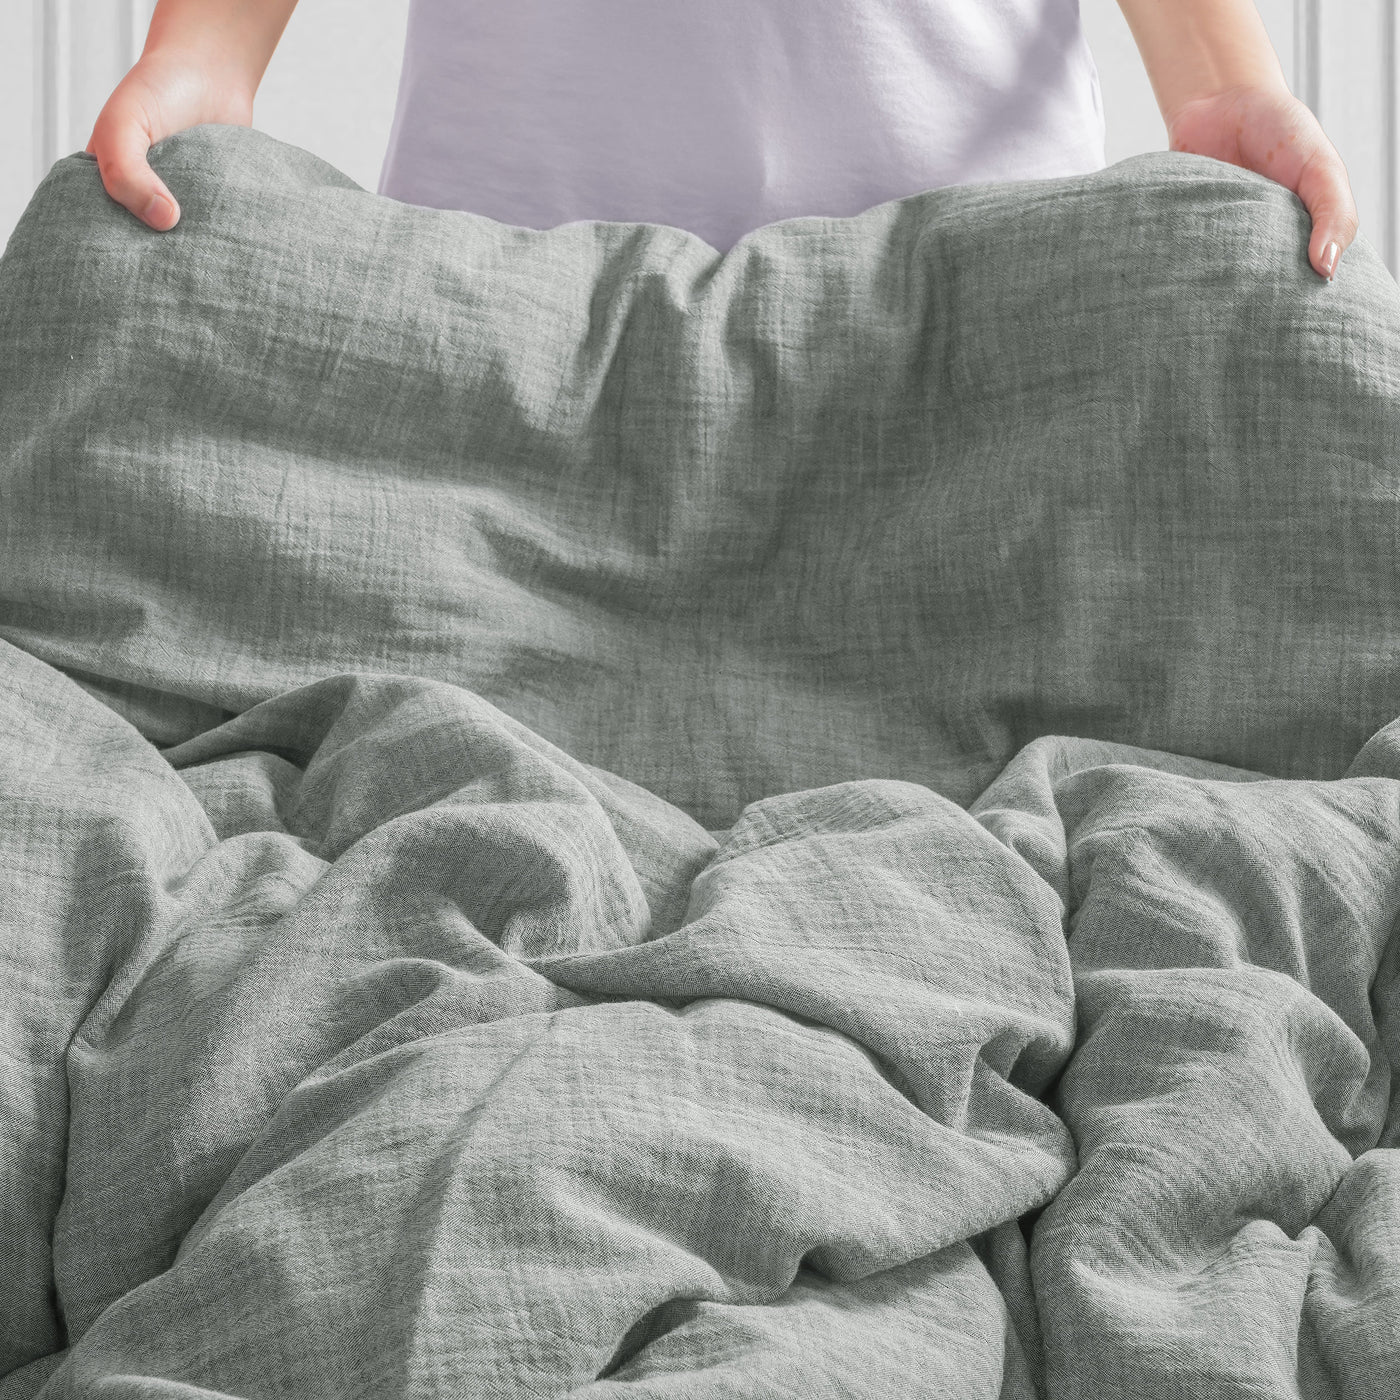 100 % Washed Cotton Breathable Bedding